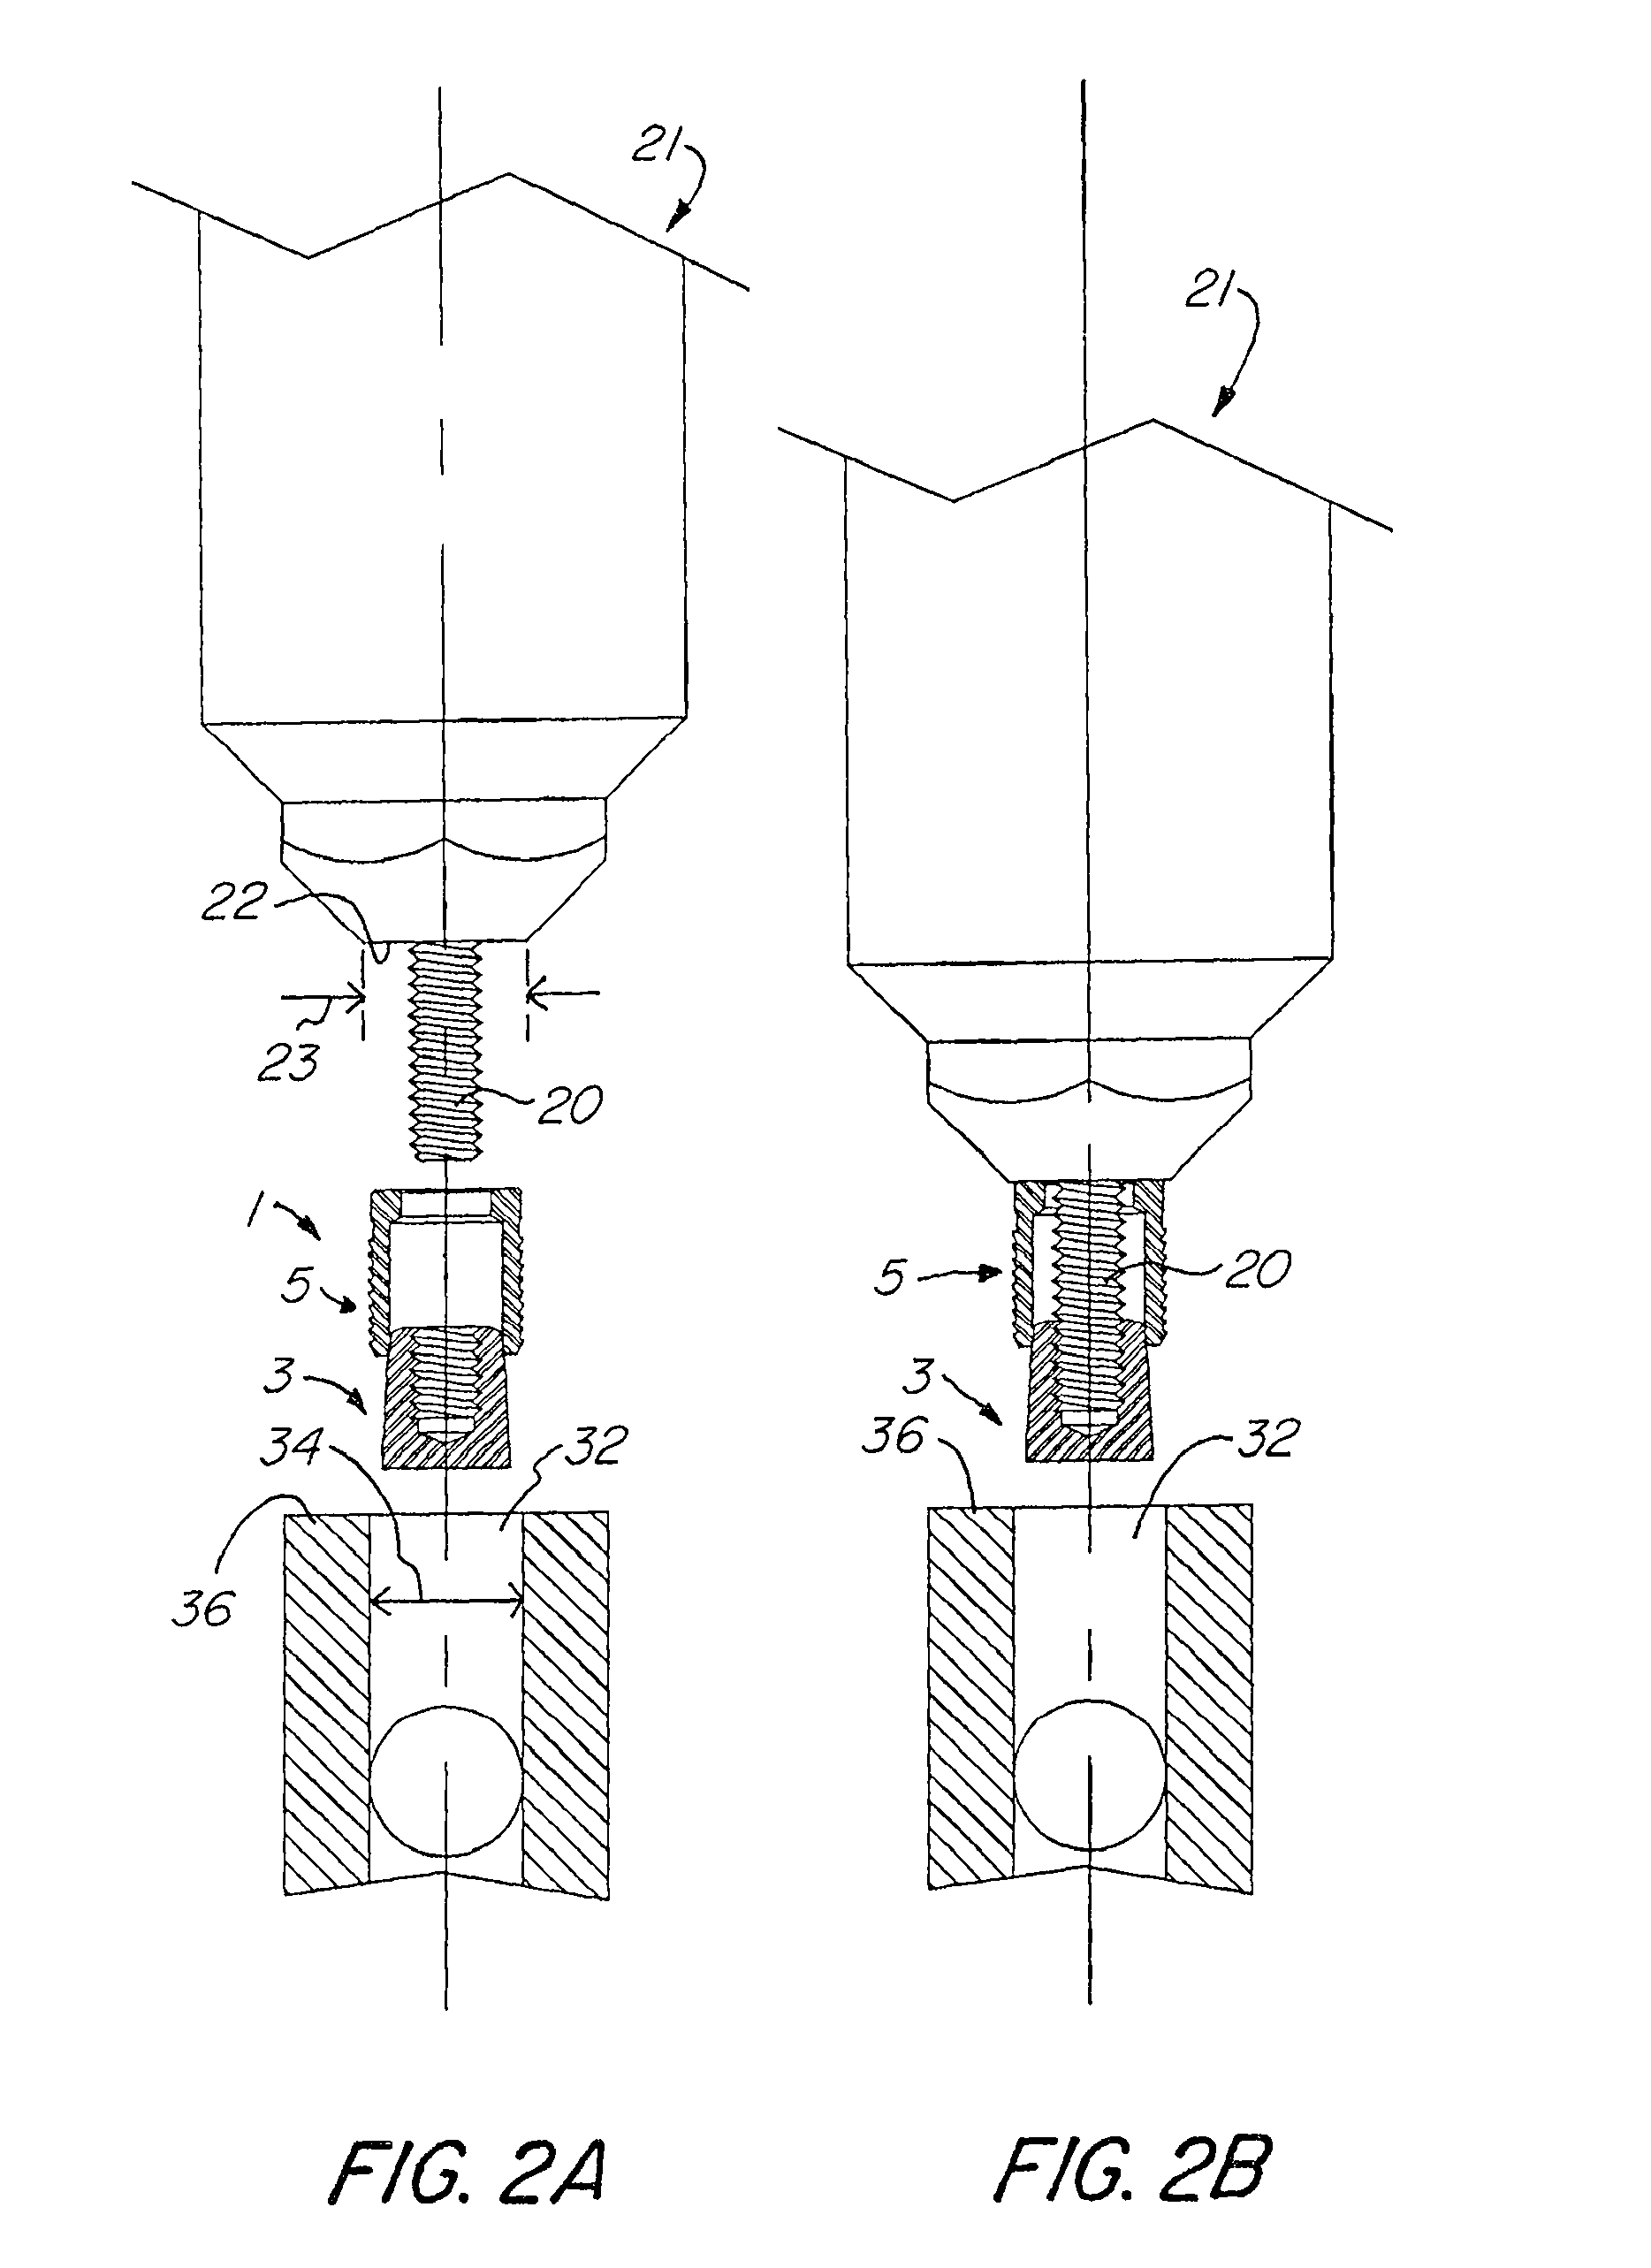 System and Method for Installing a Manifold Plug